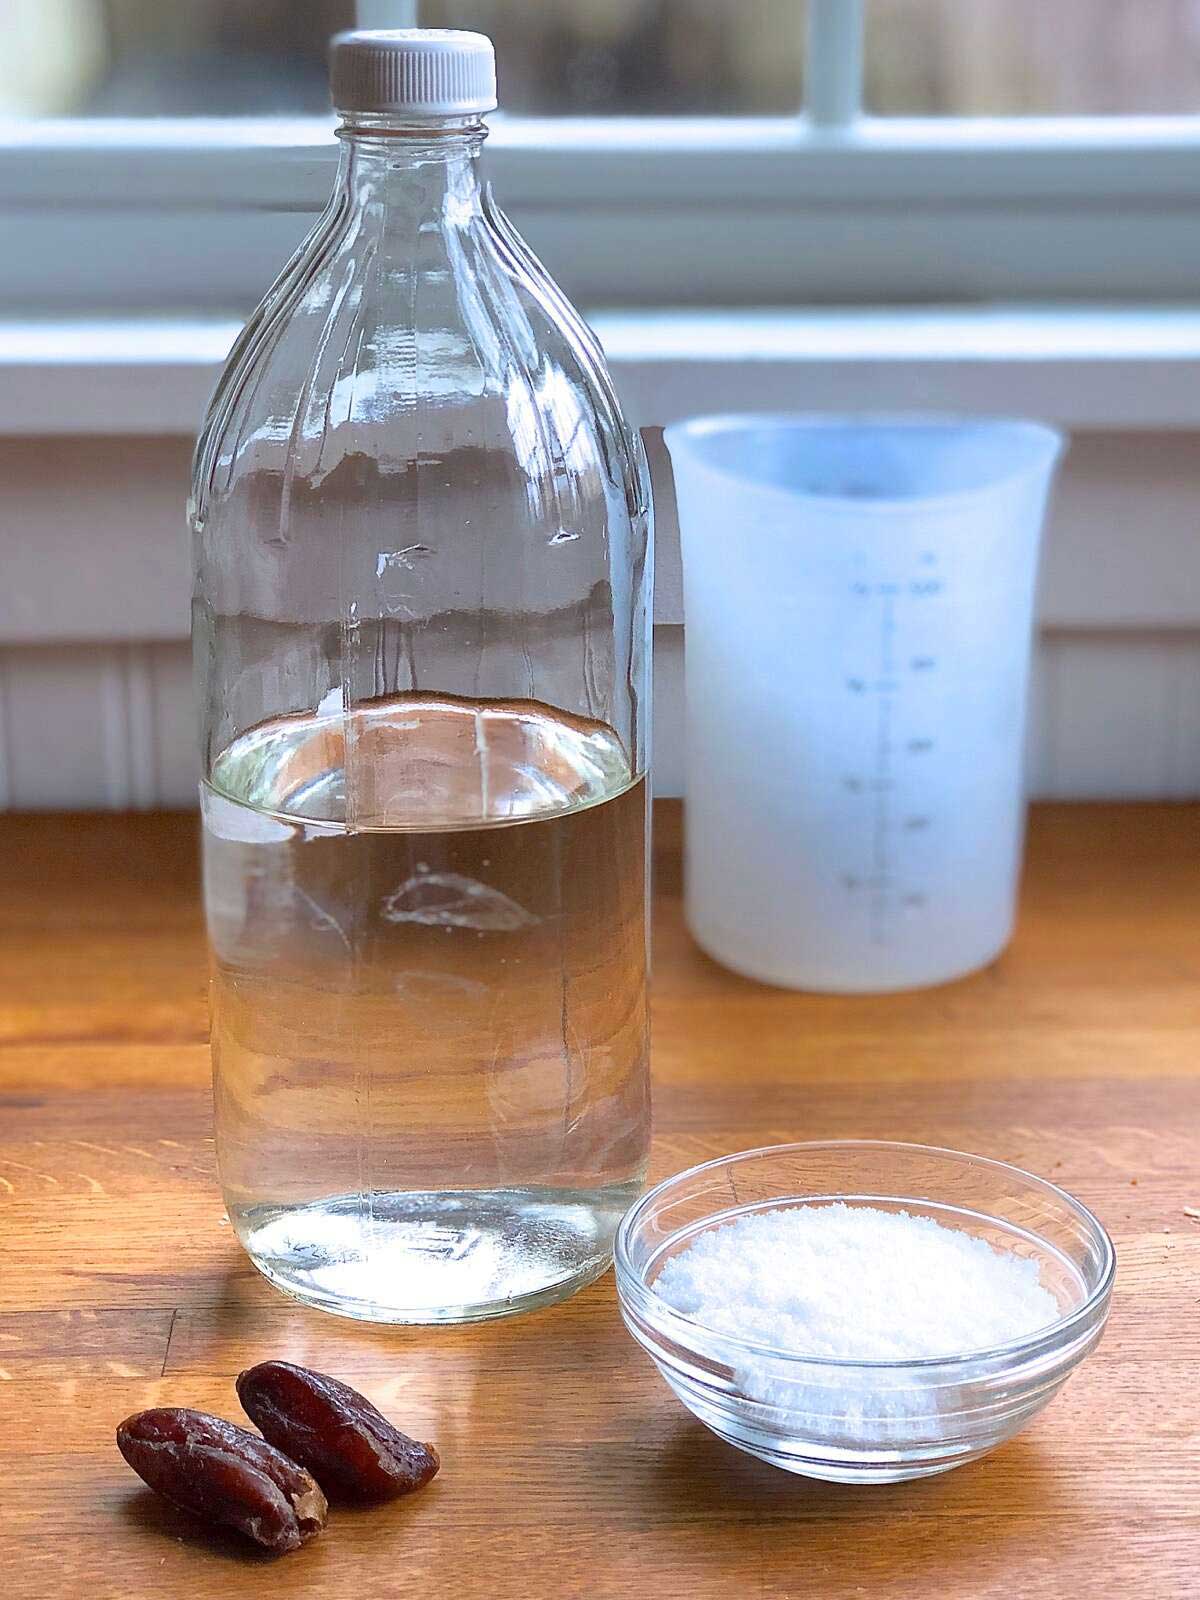 Ingredients for making a yeast water starter: dried figs, water, and sugar